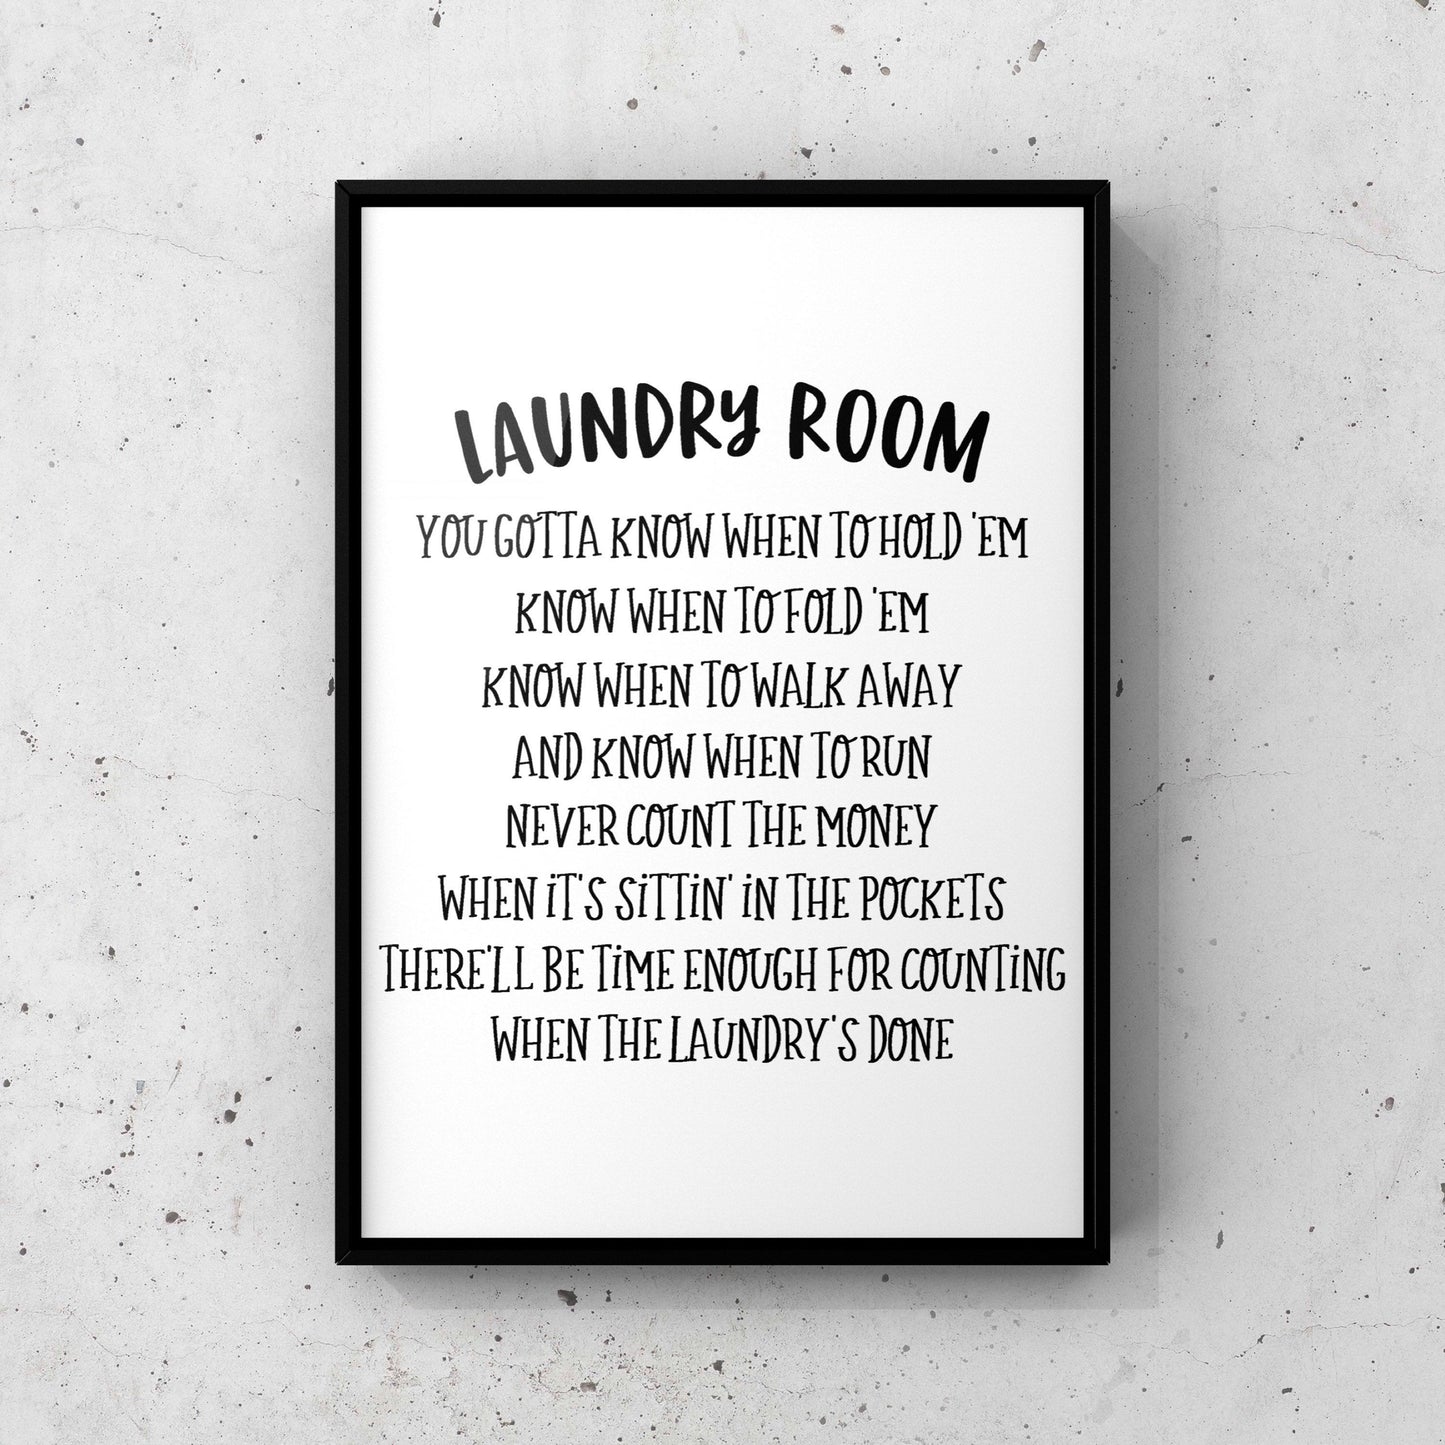 Laundry room song